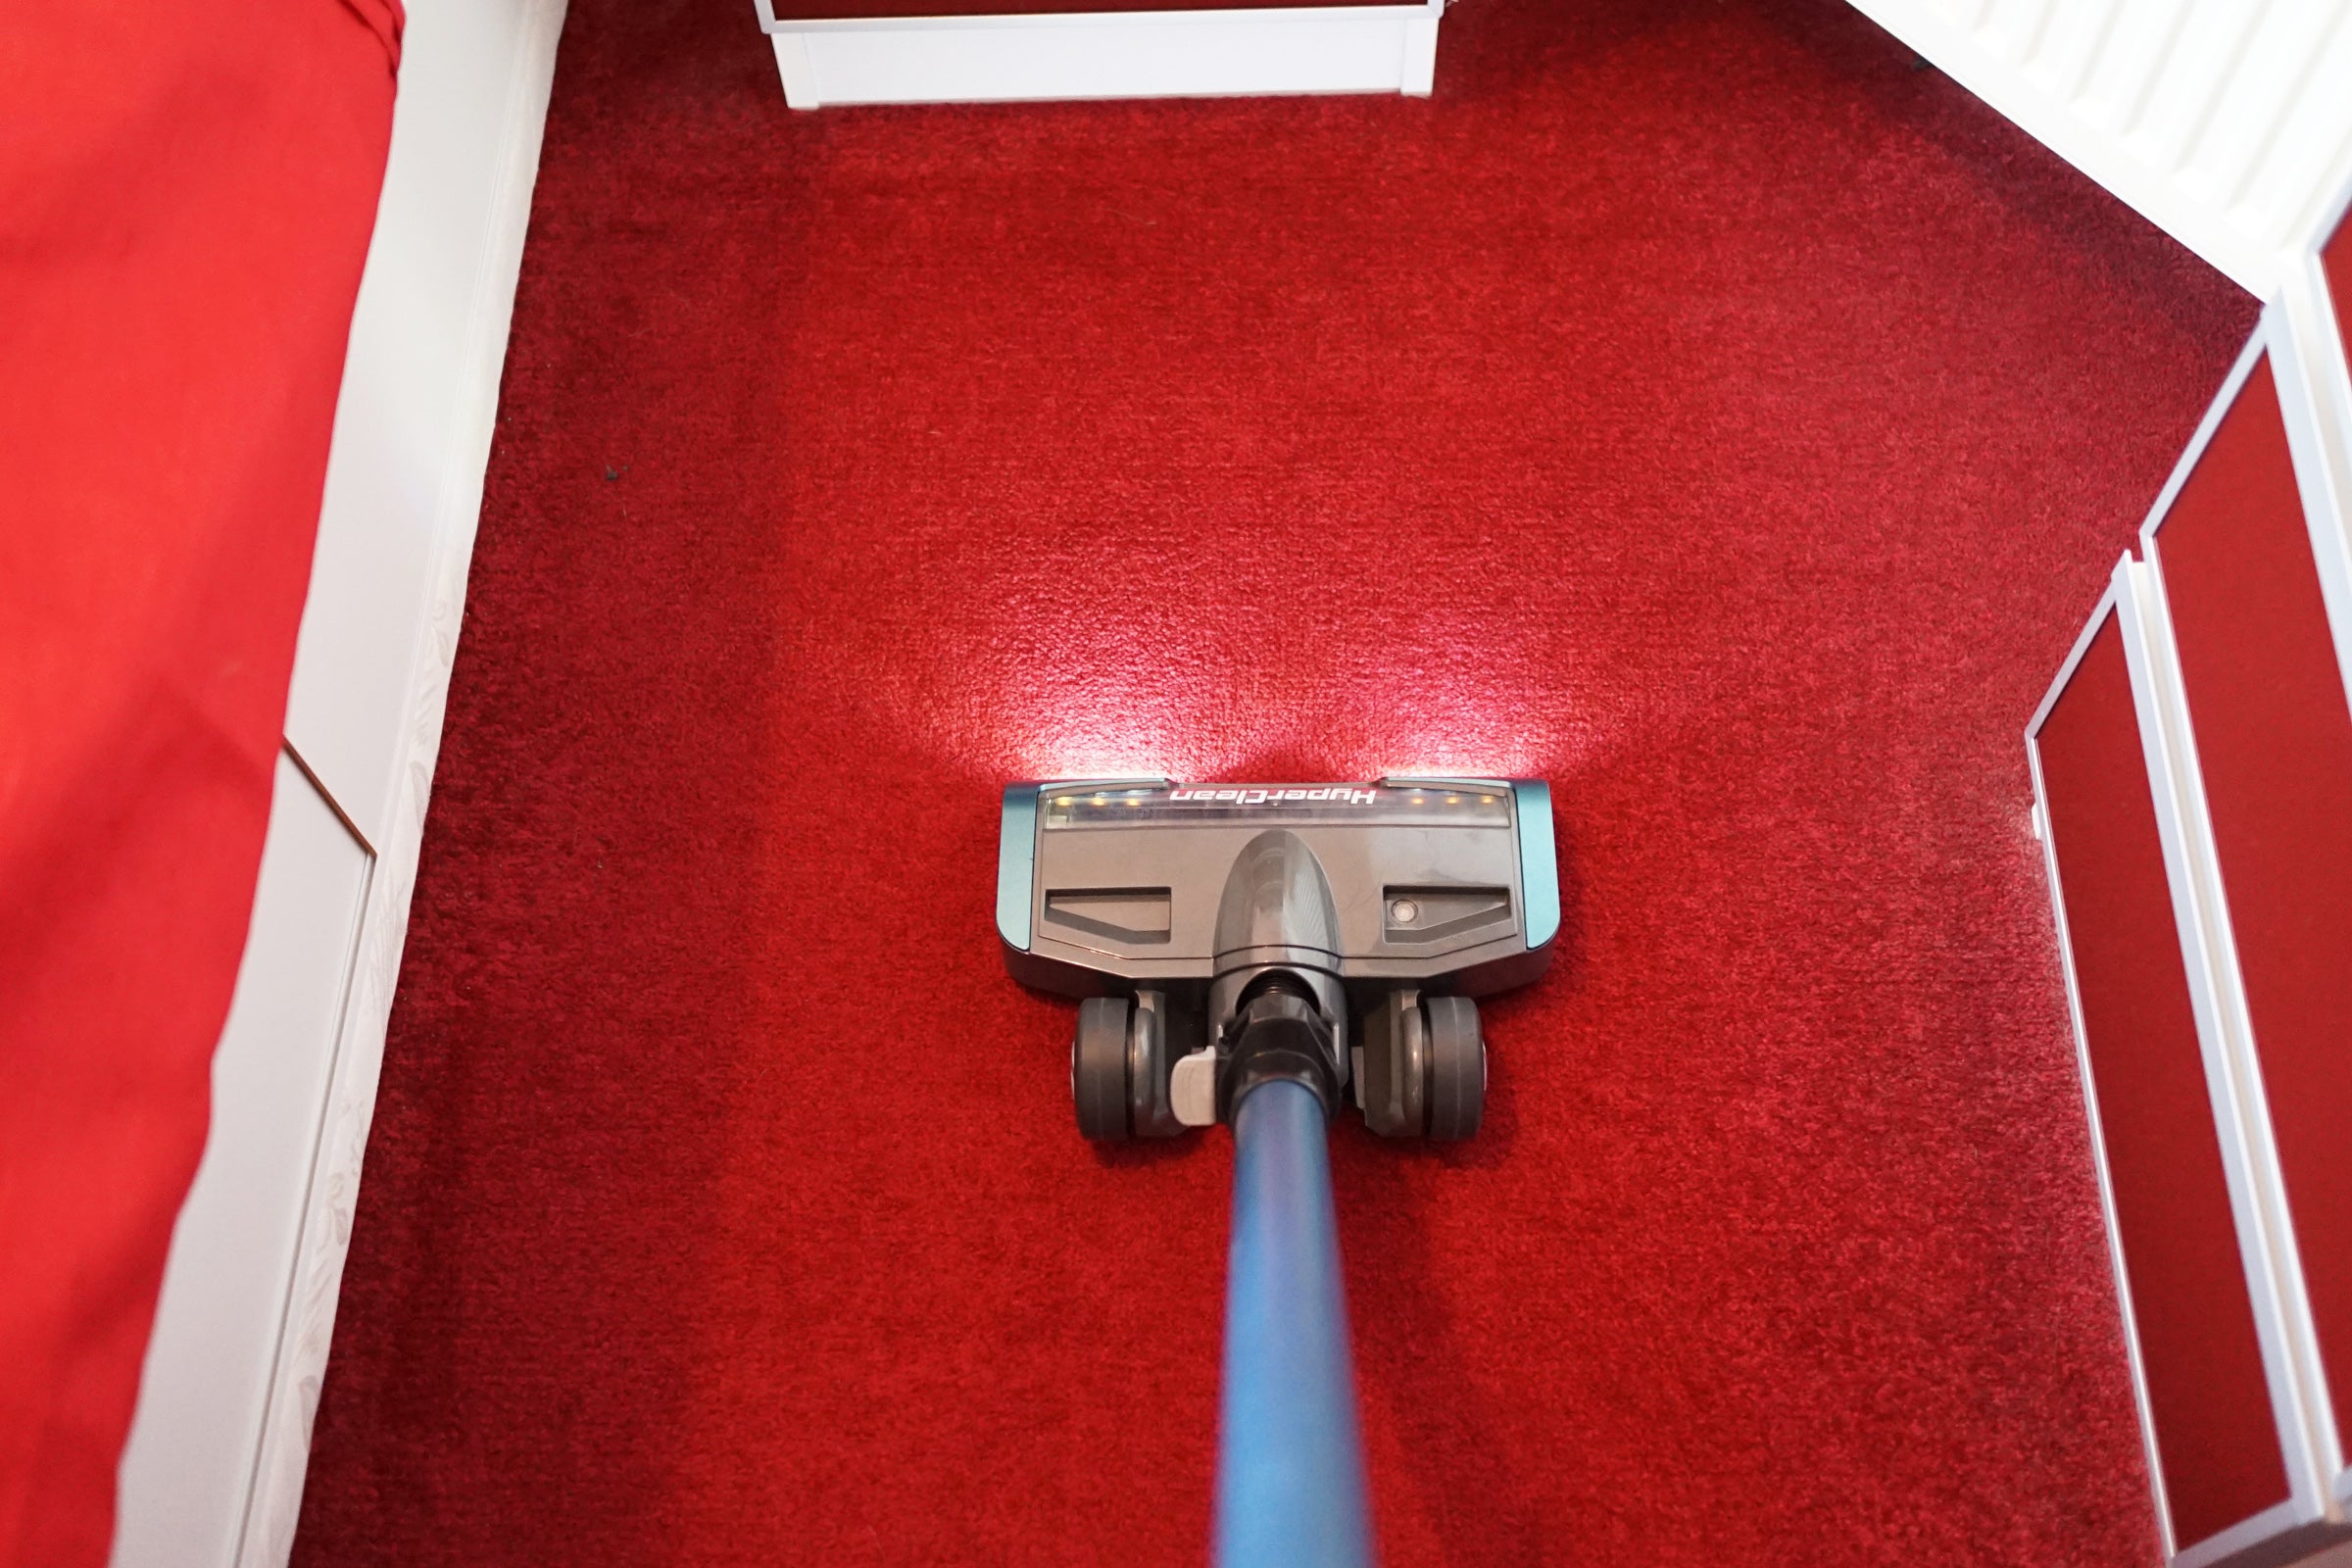 A Swan Hyperclean Eureka being used on a red carpet in a bedroomA complete set of Swan Hyperclean Eureka kept on wooden floor with packaging box